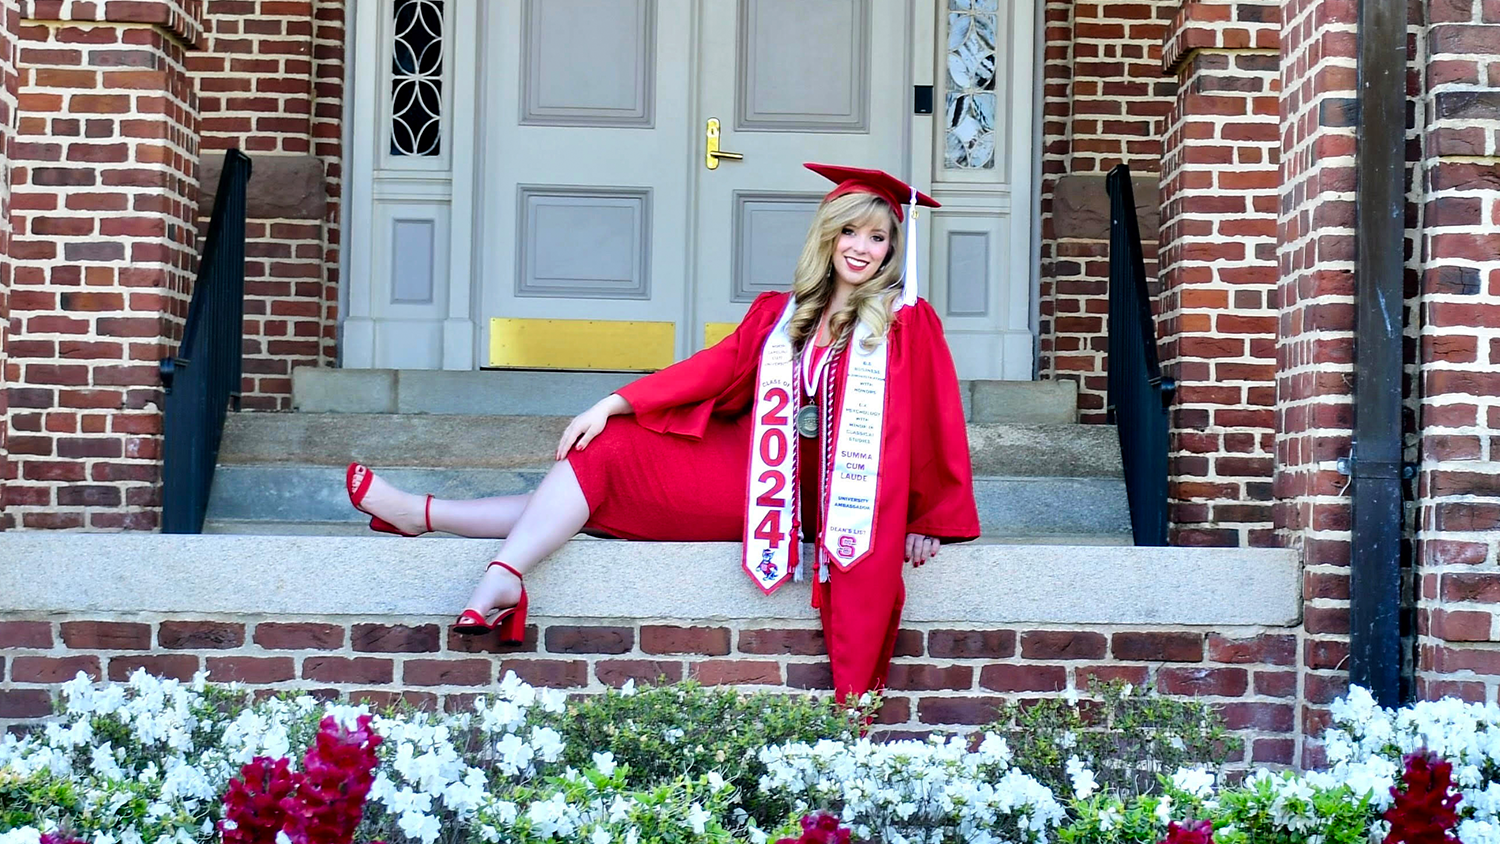 Samantha Steffanus posing in her cap and gown outside of an NC State building